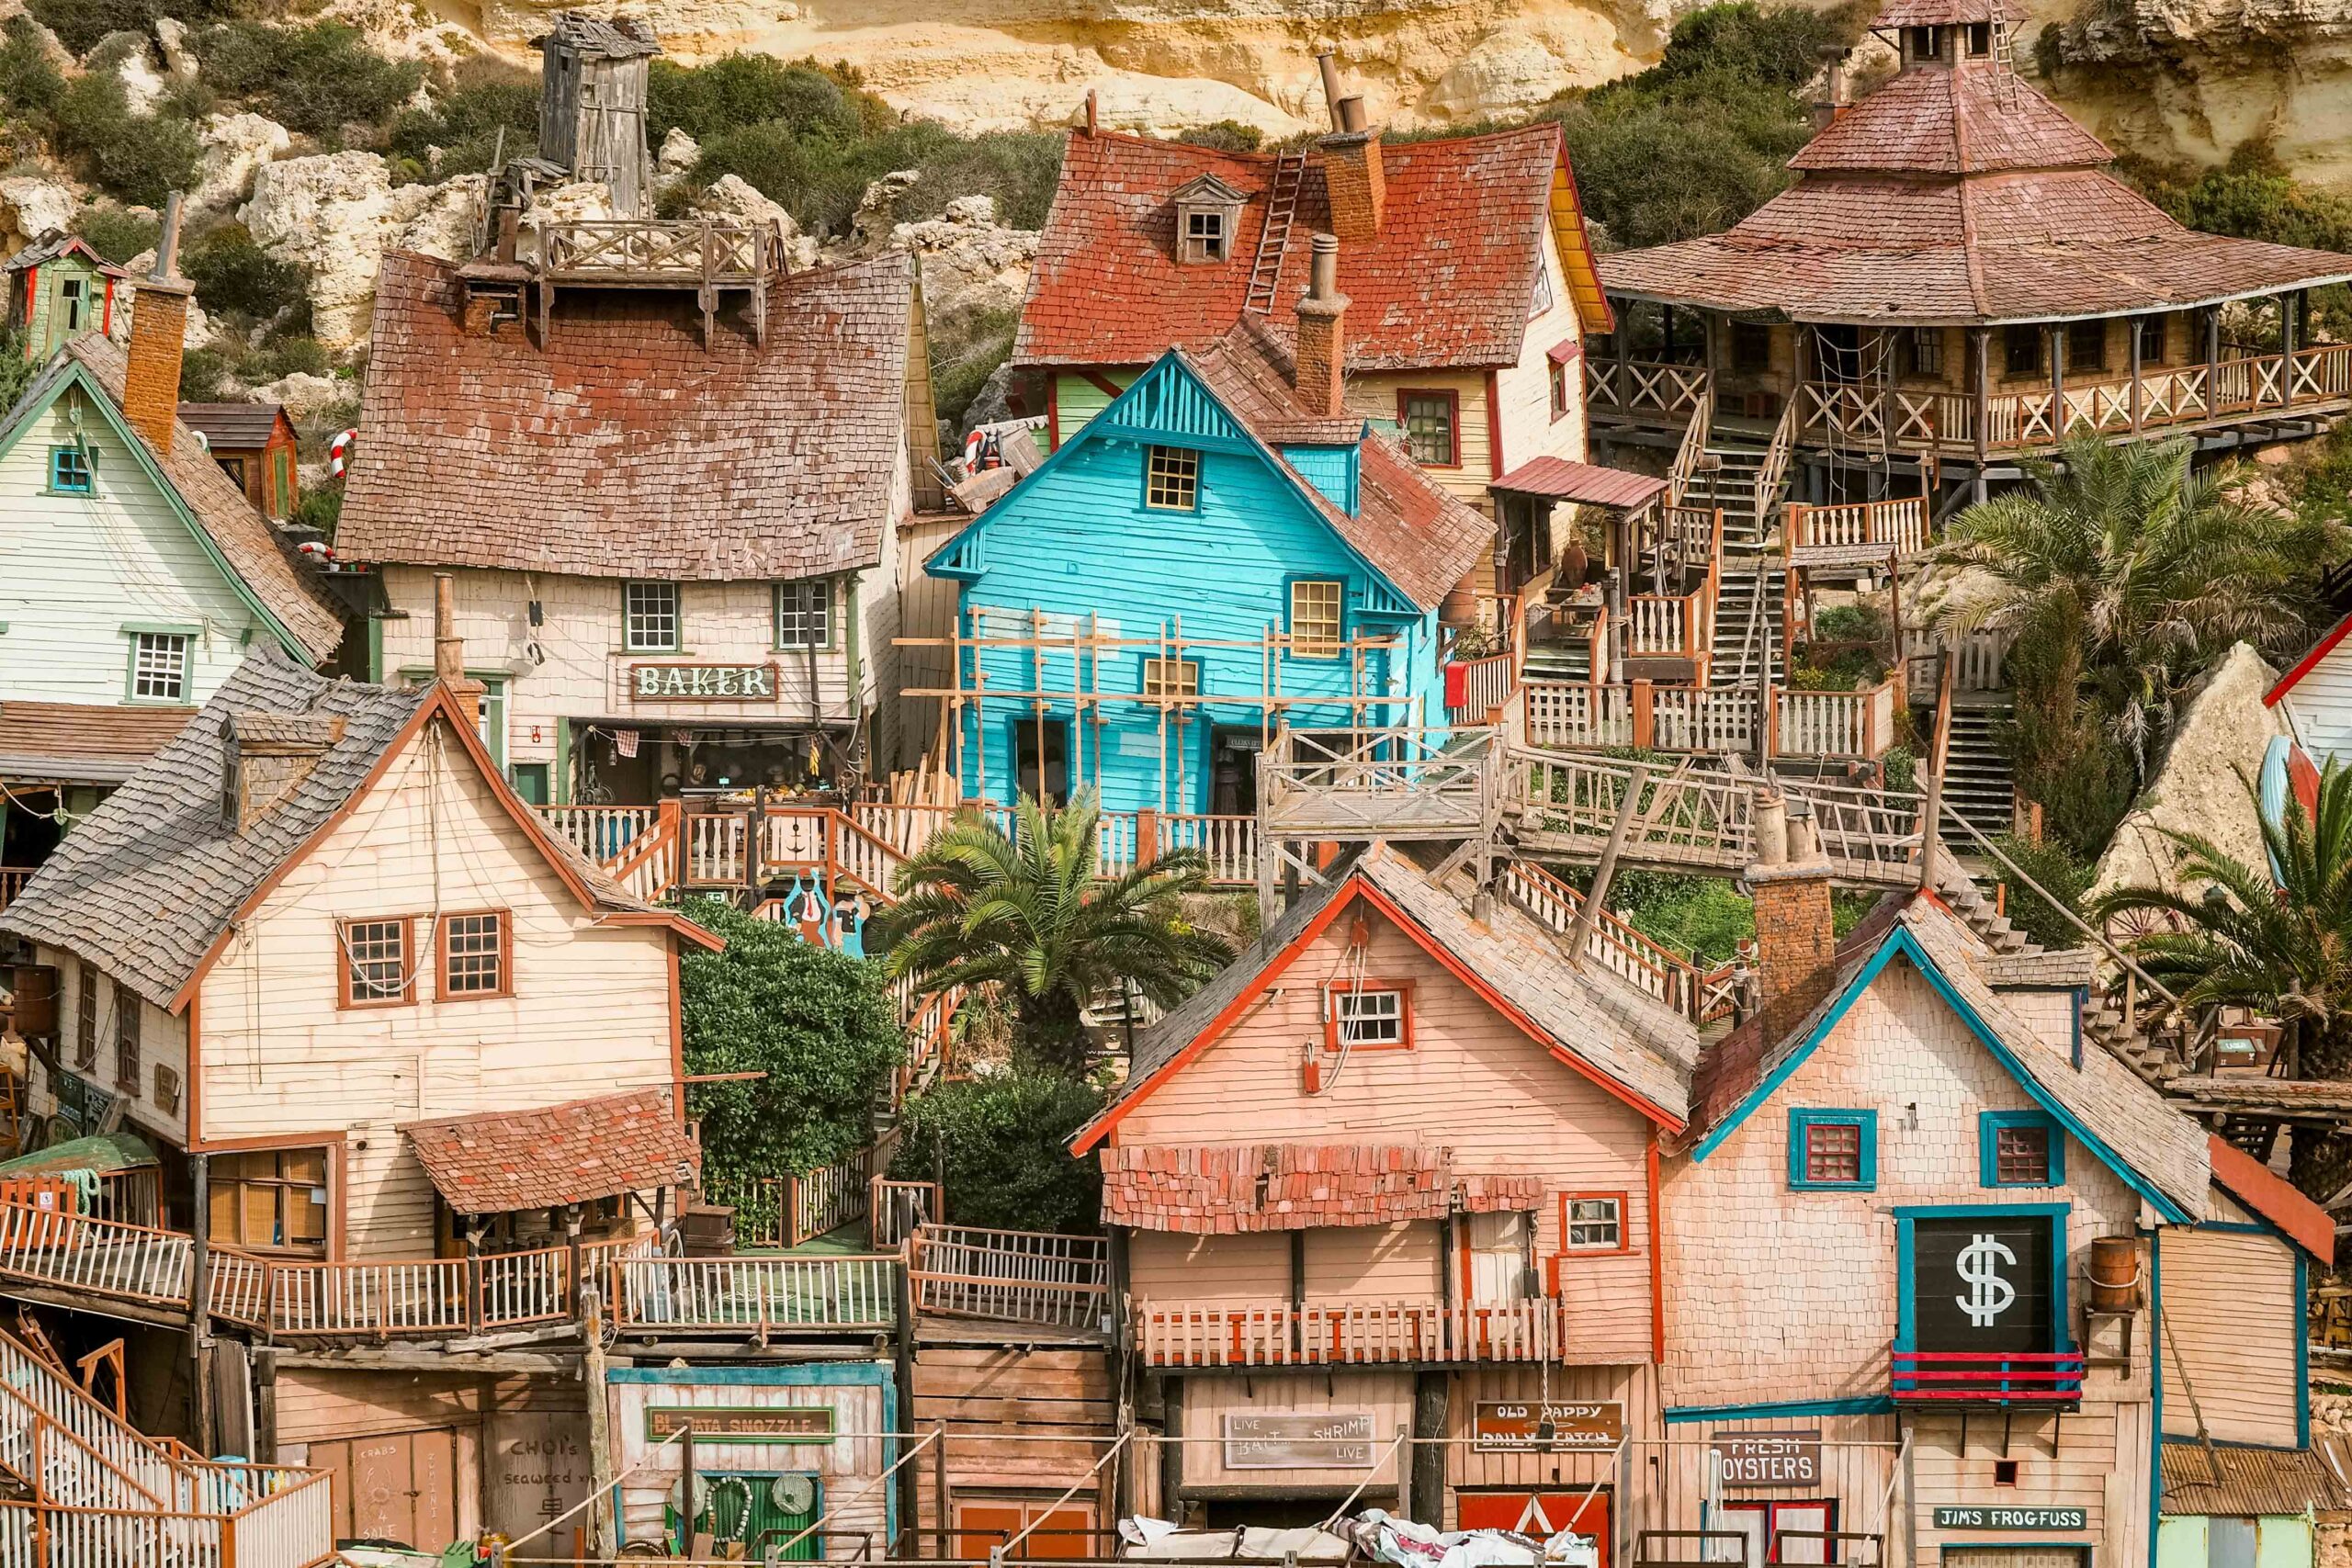 Houses and shacks decor of Popeye Village attraction park and movie set in Malta